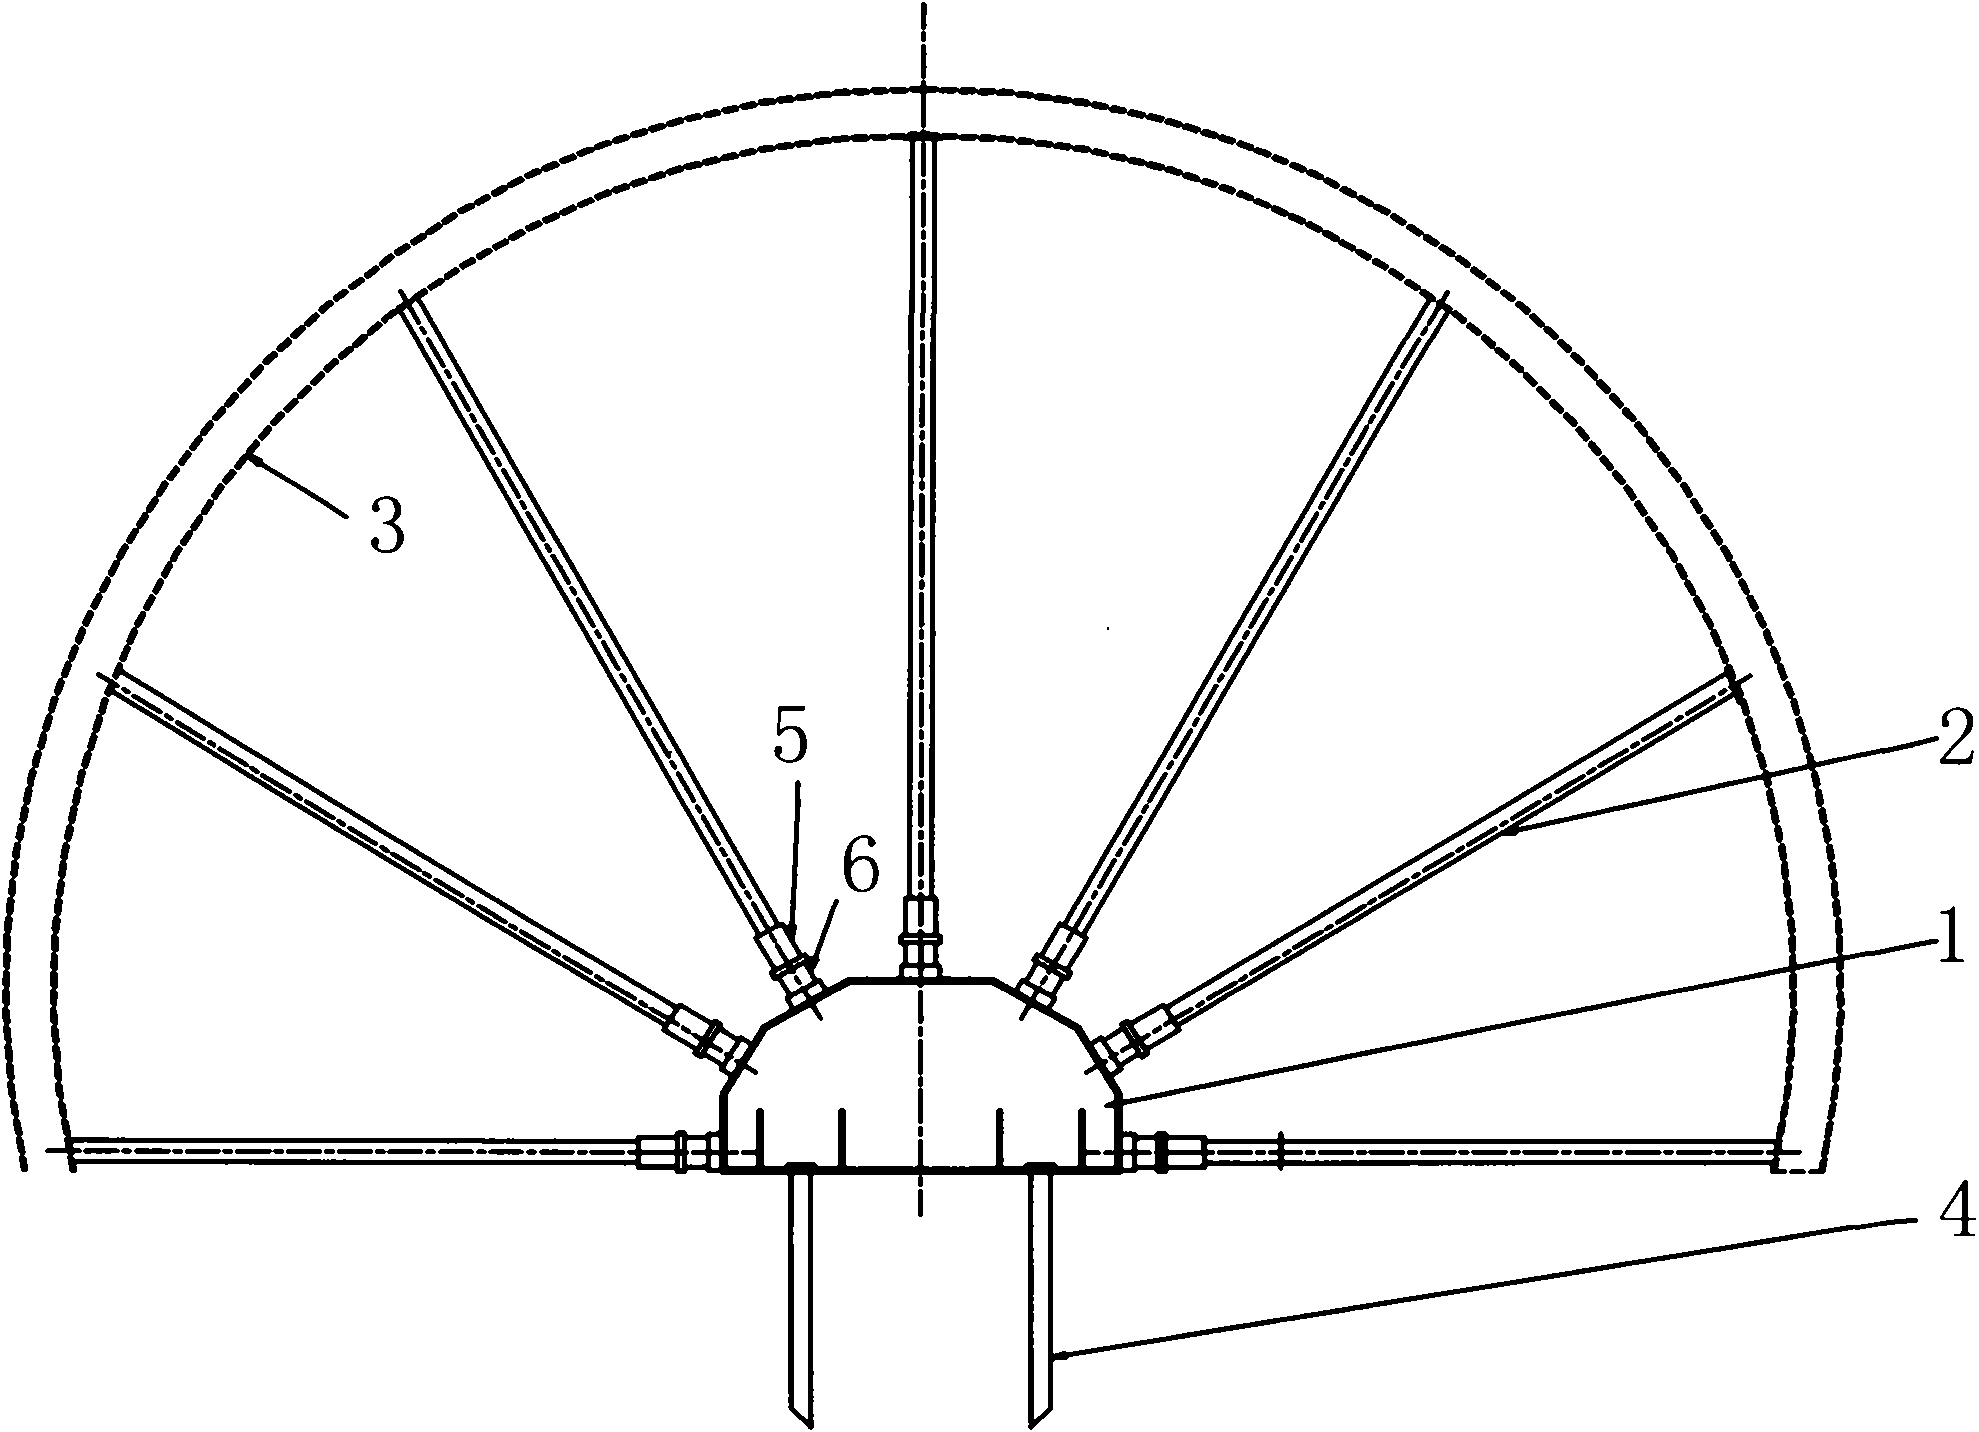 Hydraulic fan-shaped support system for controlling steel frame deformation in tunnel construction